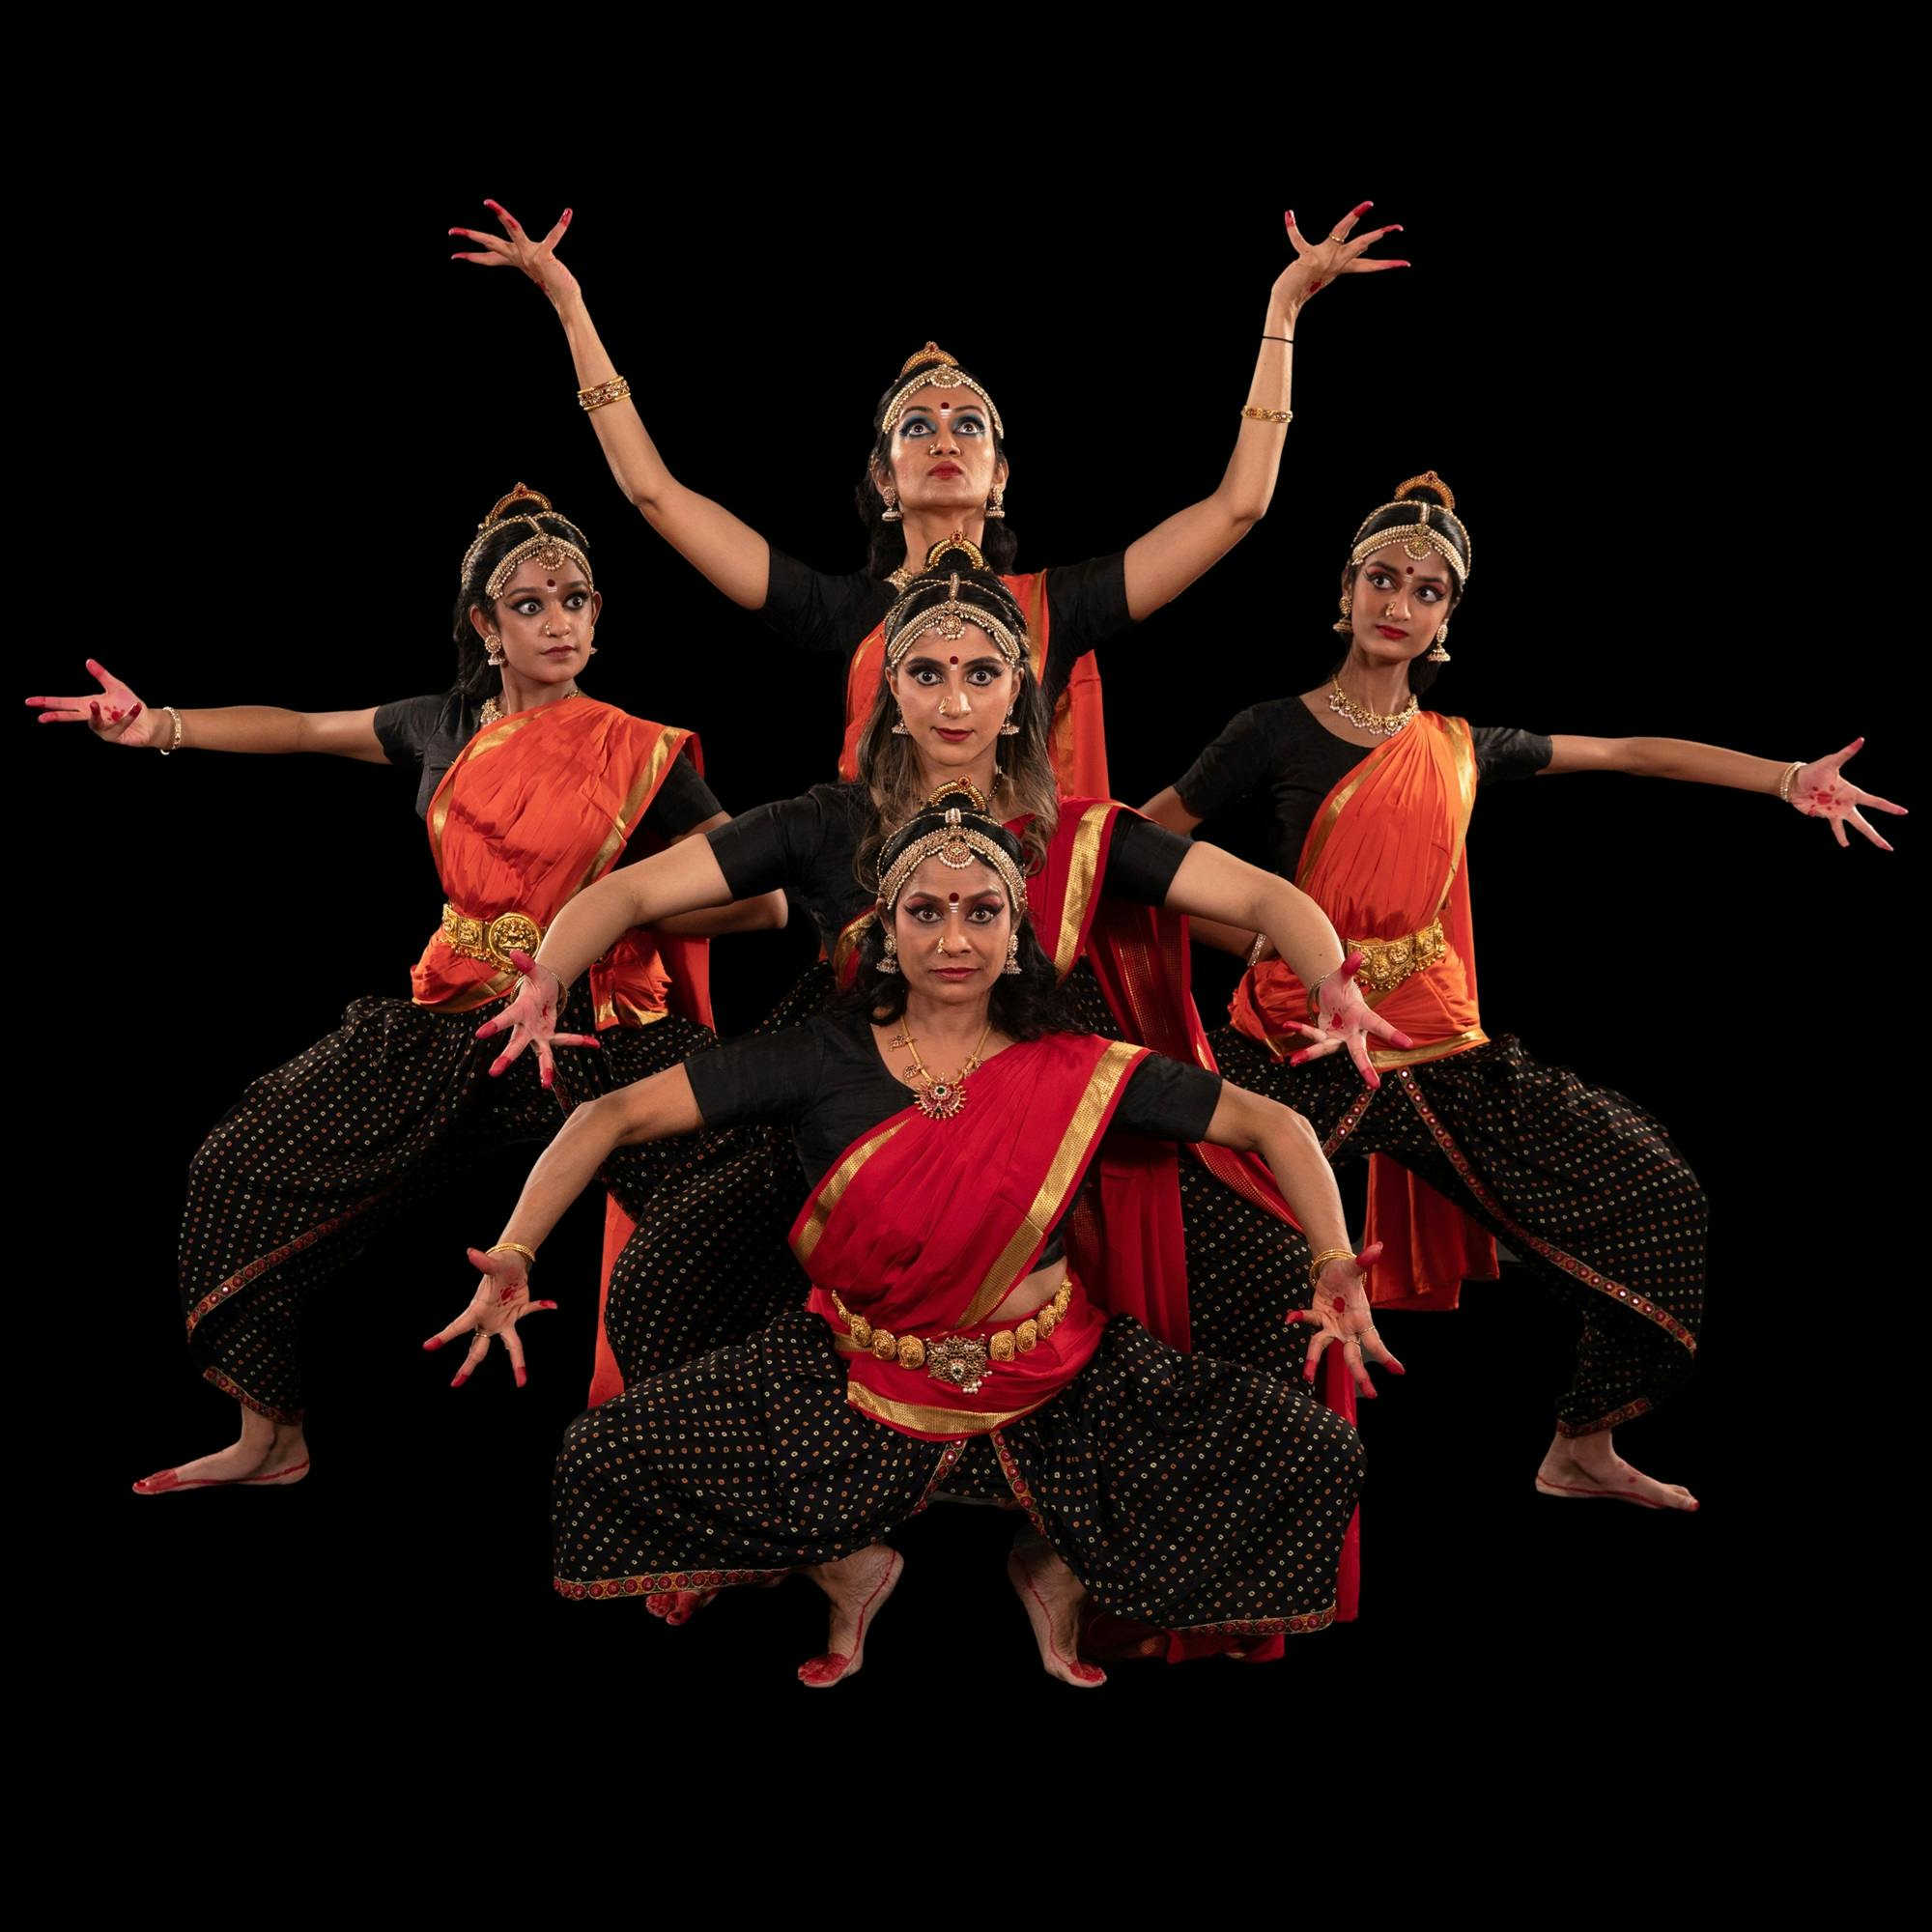 Pin by Ragini on Dance poses | Bharatanatyam poses, Indian classical dance,  Indian dance